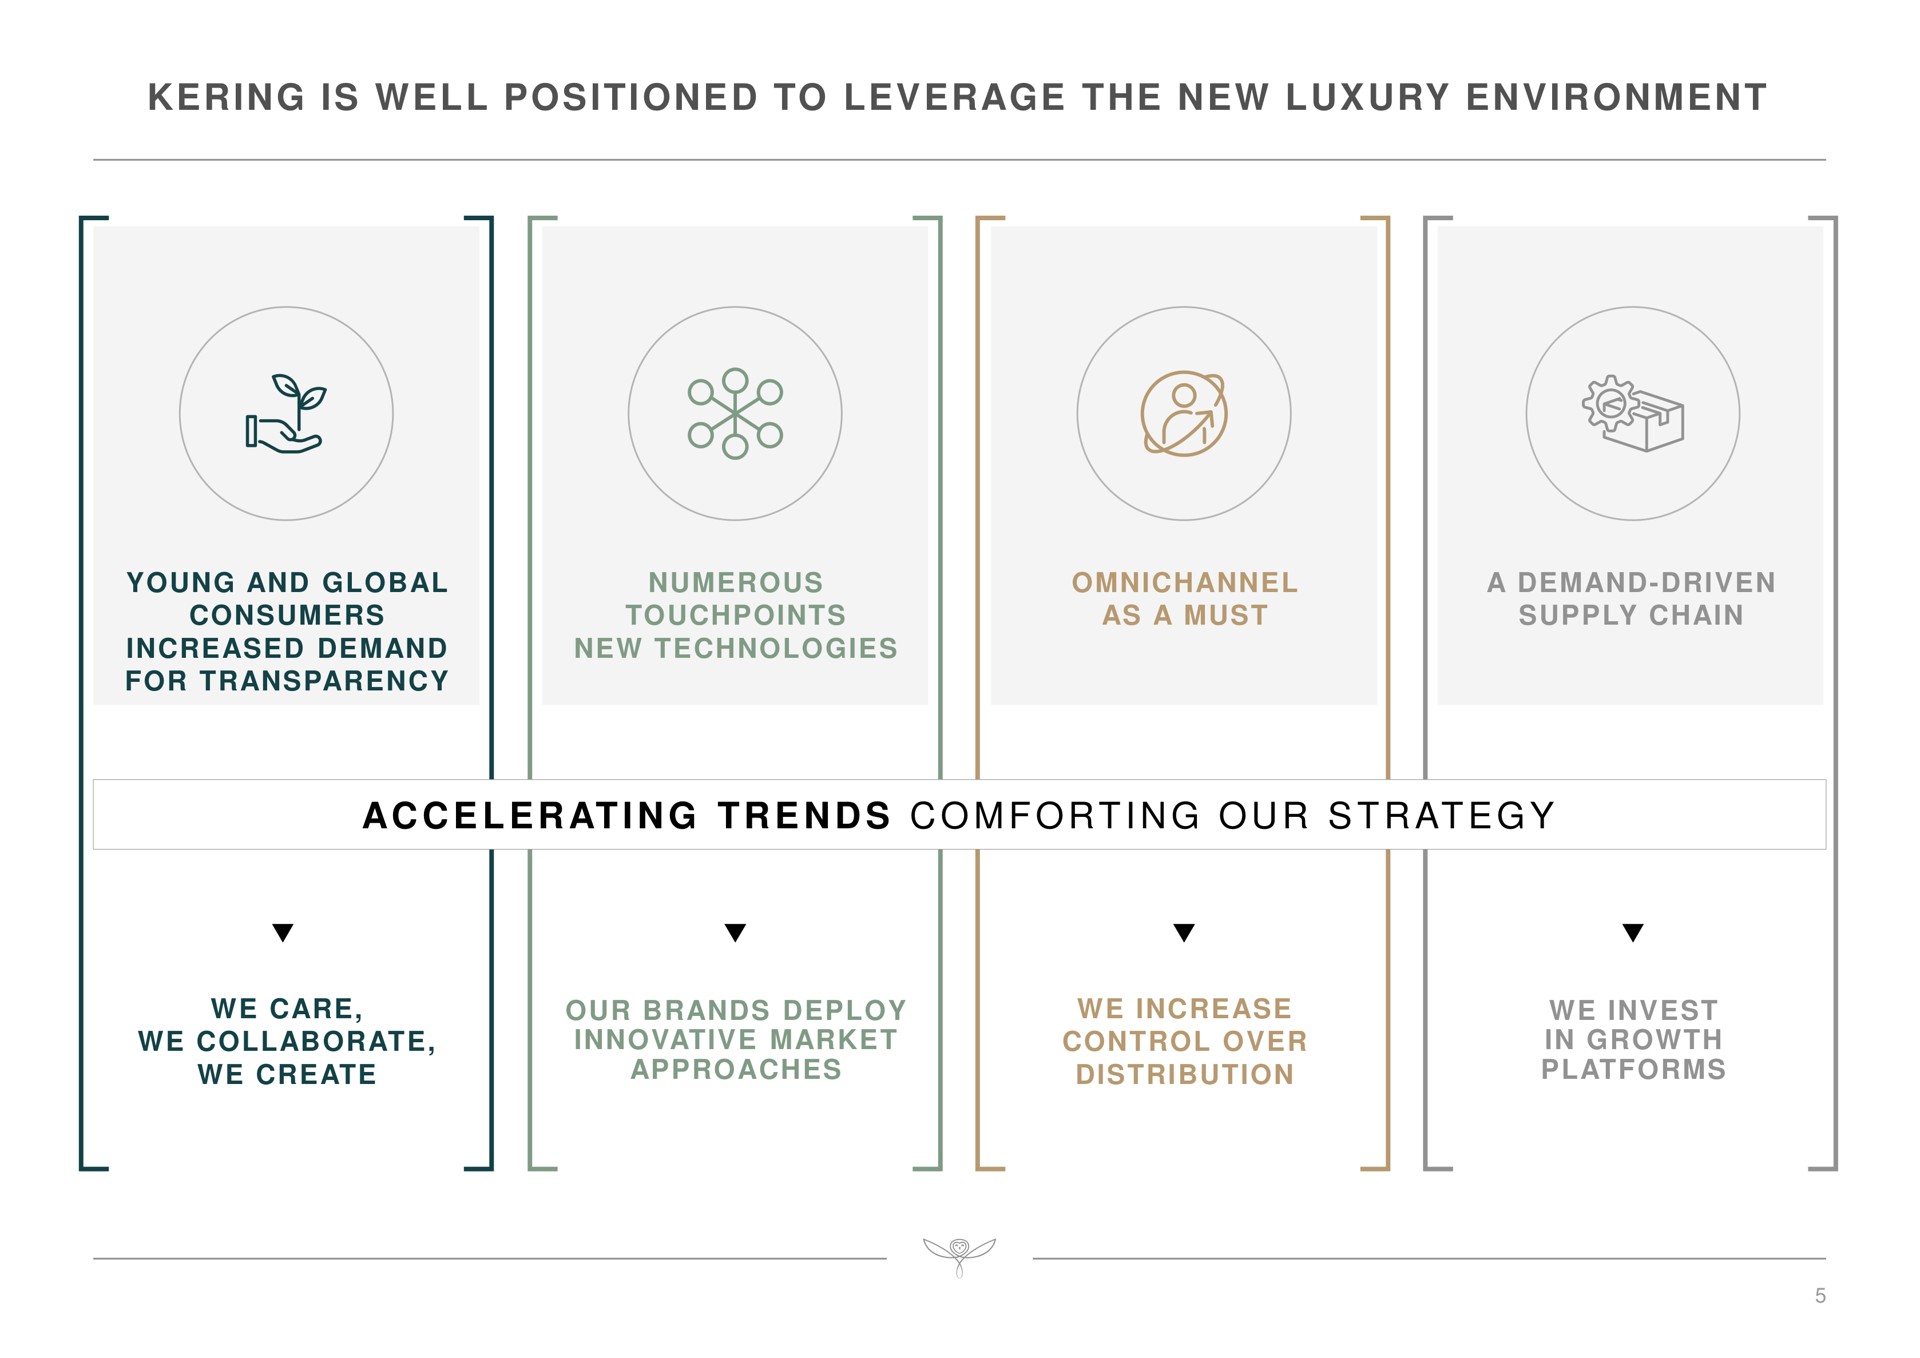 is well positioned to leverage the new luxury environment at i i at a accelerating trends comforting our strategy we care we collaborate we create | Kering